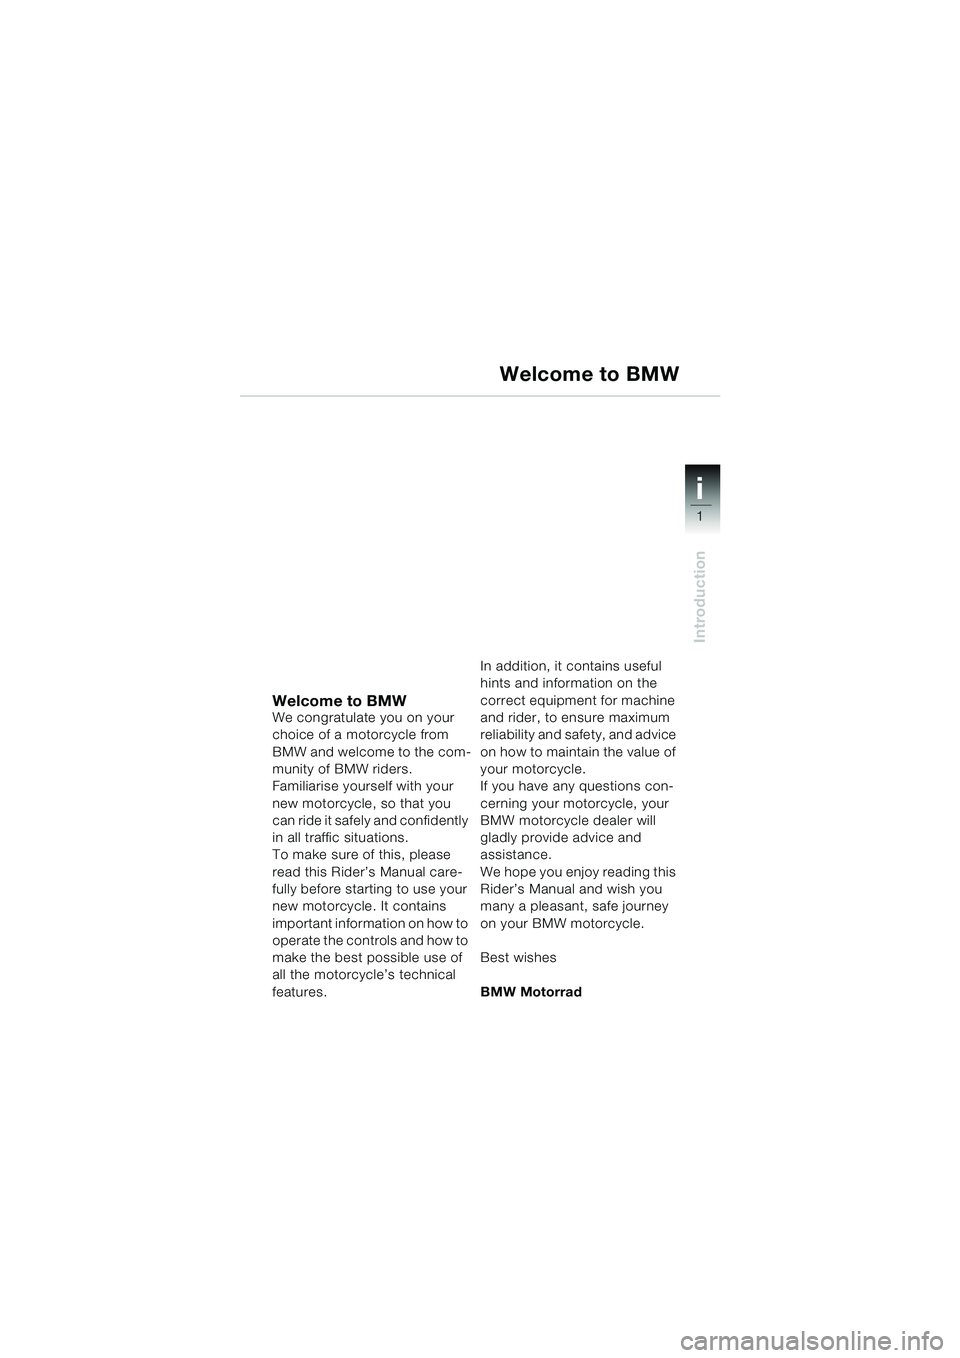 BMW MOTORRAD R 1150 R 2004  Riders Manual (in English) 1
Introduction
i
Welcome to BMWWe congratulate you on your 
choice of a motorcycle from 
BMW and welcome to the com-
munity of BMW riders.
Familiarise yourself with your 
new motorcycle, so that you 
